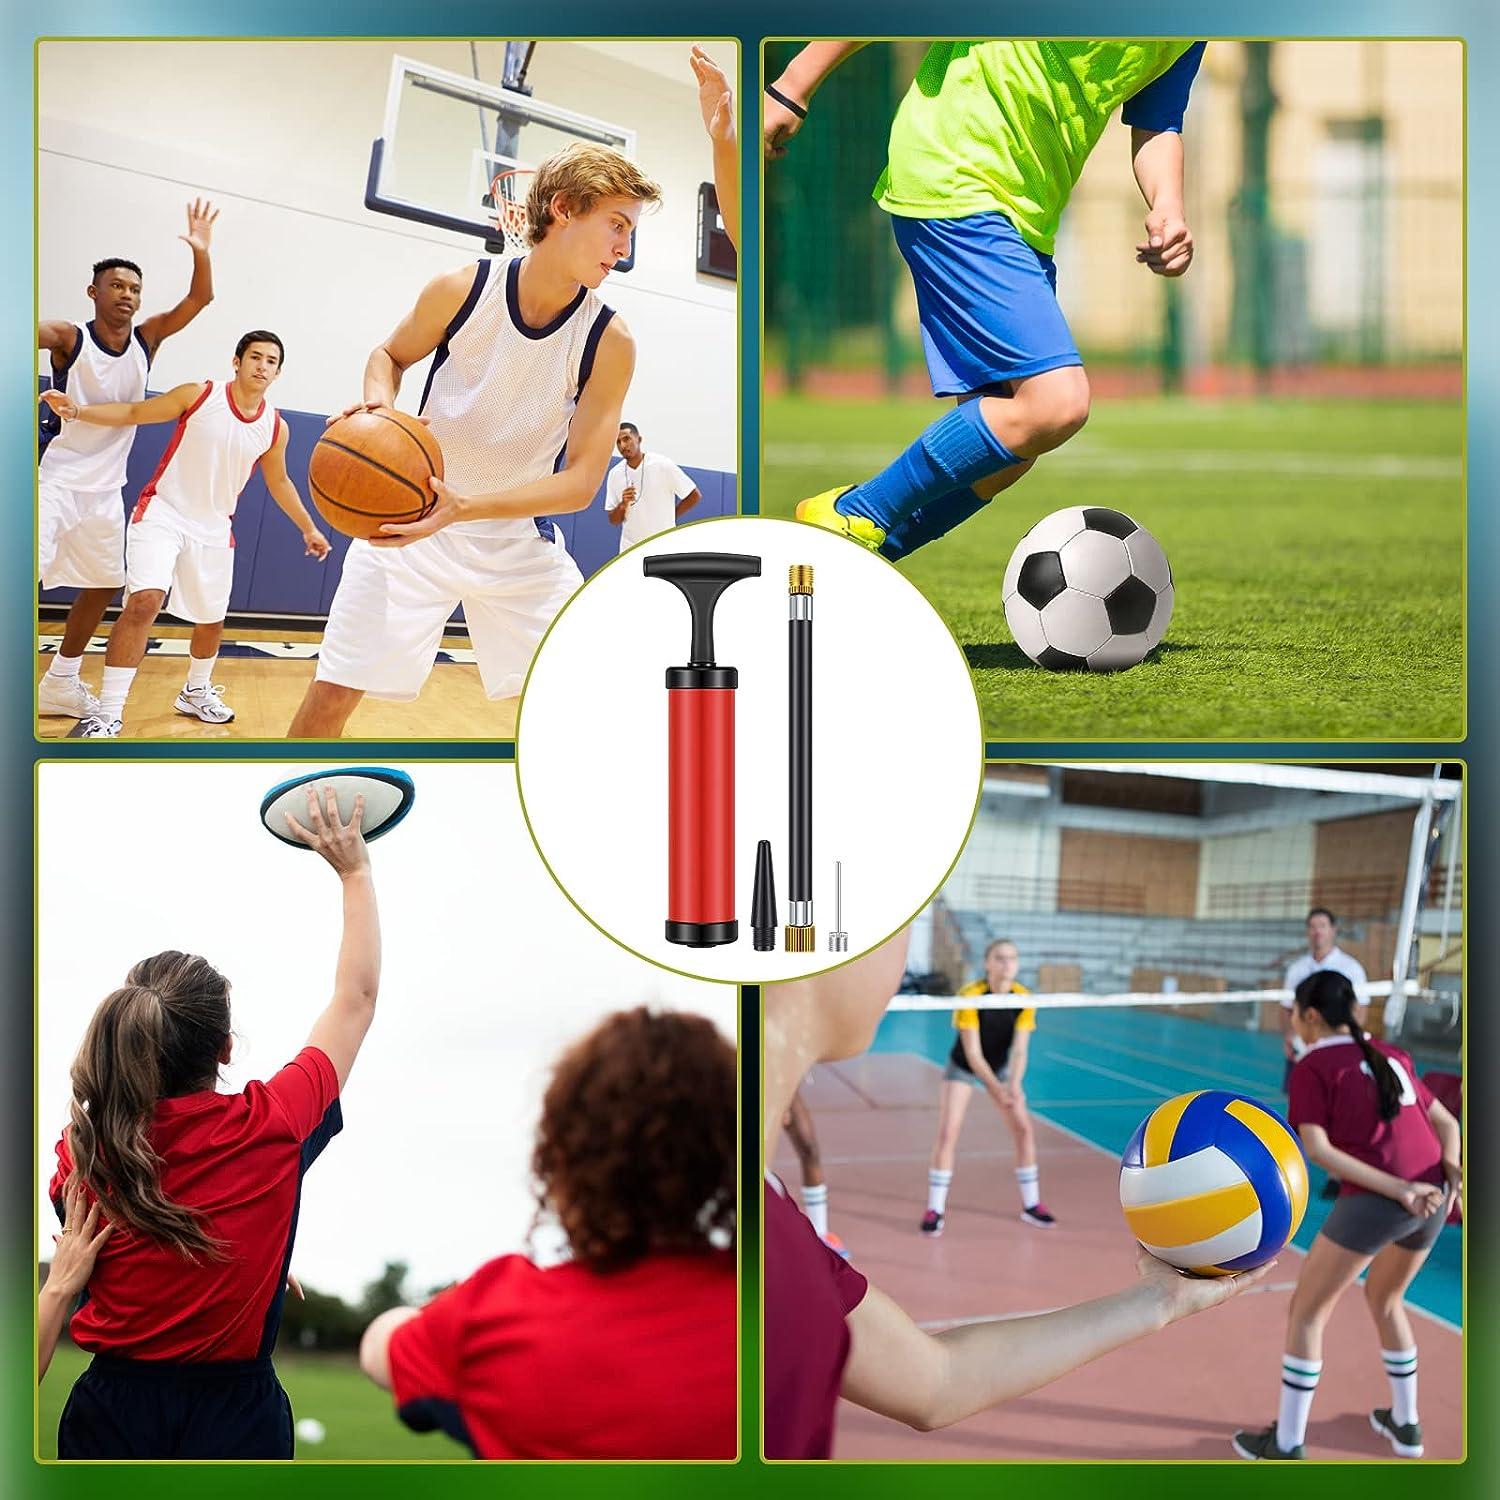 Portable Ball Inflator: Inflate Basketballs, Footballs, and Volleyballs  with Ease!